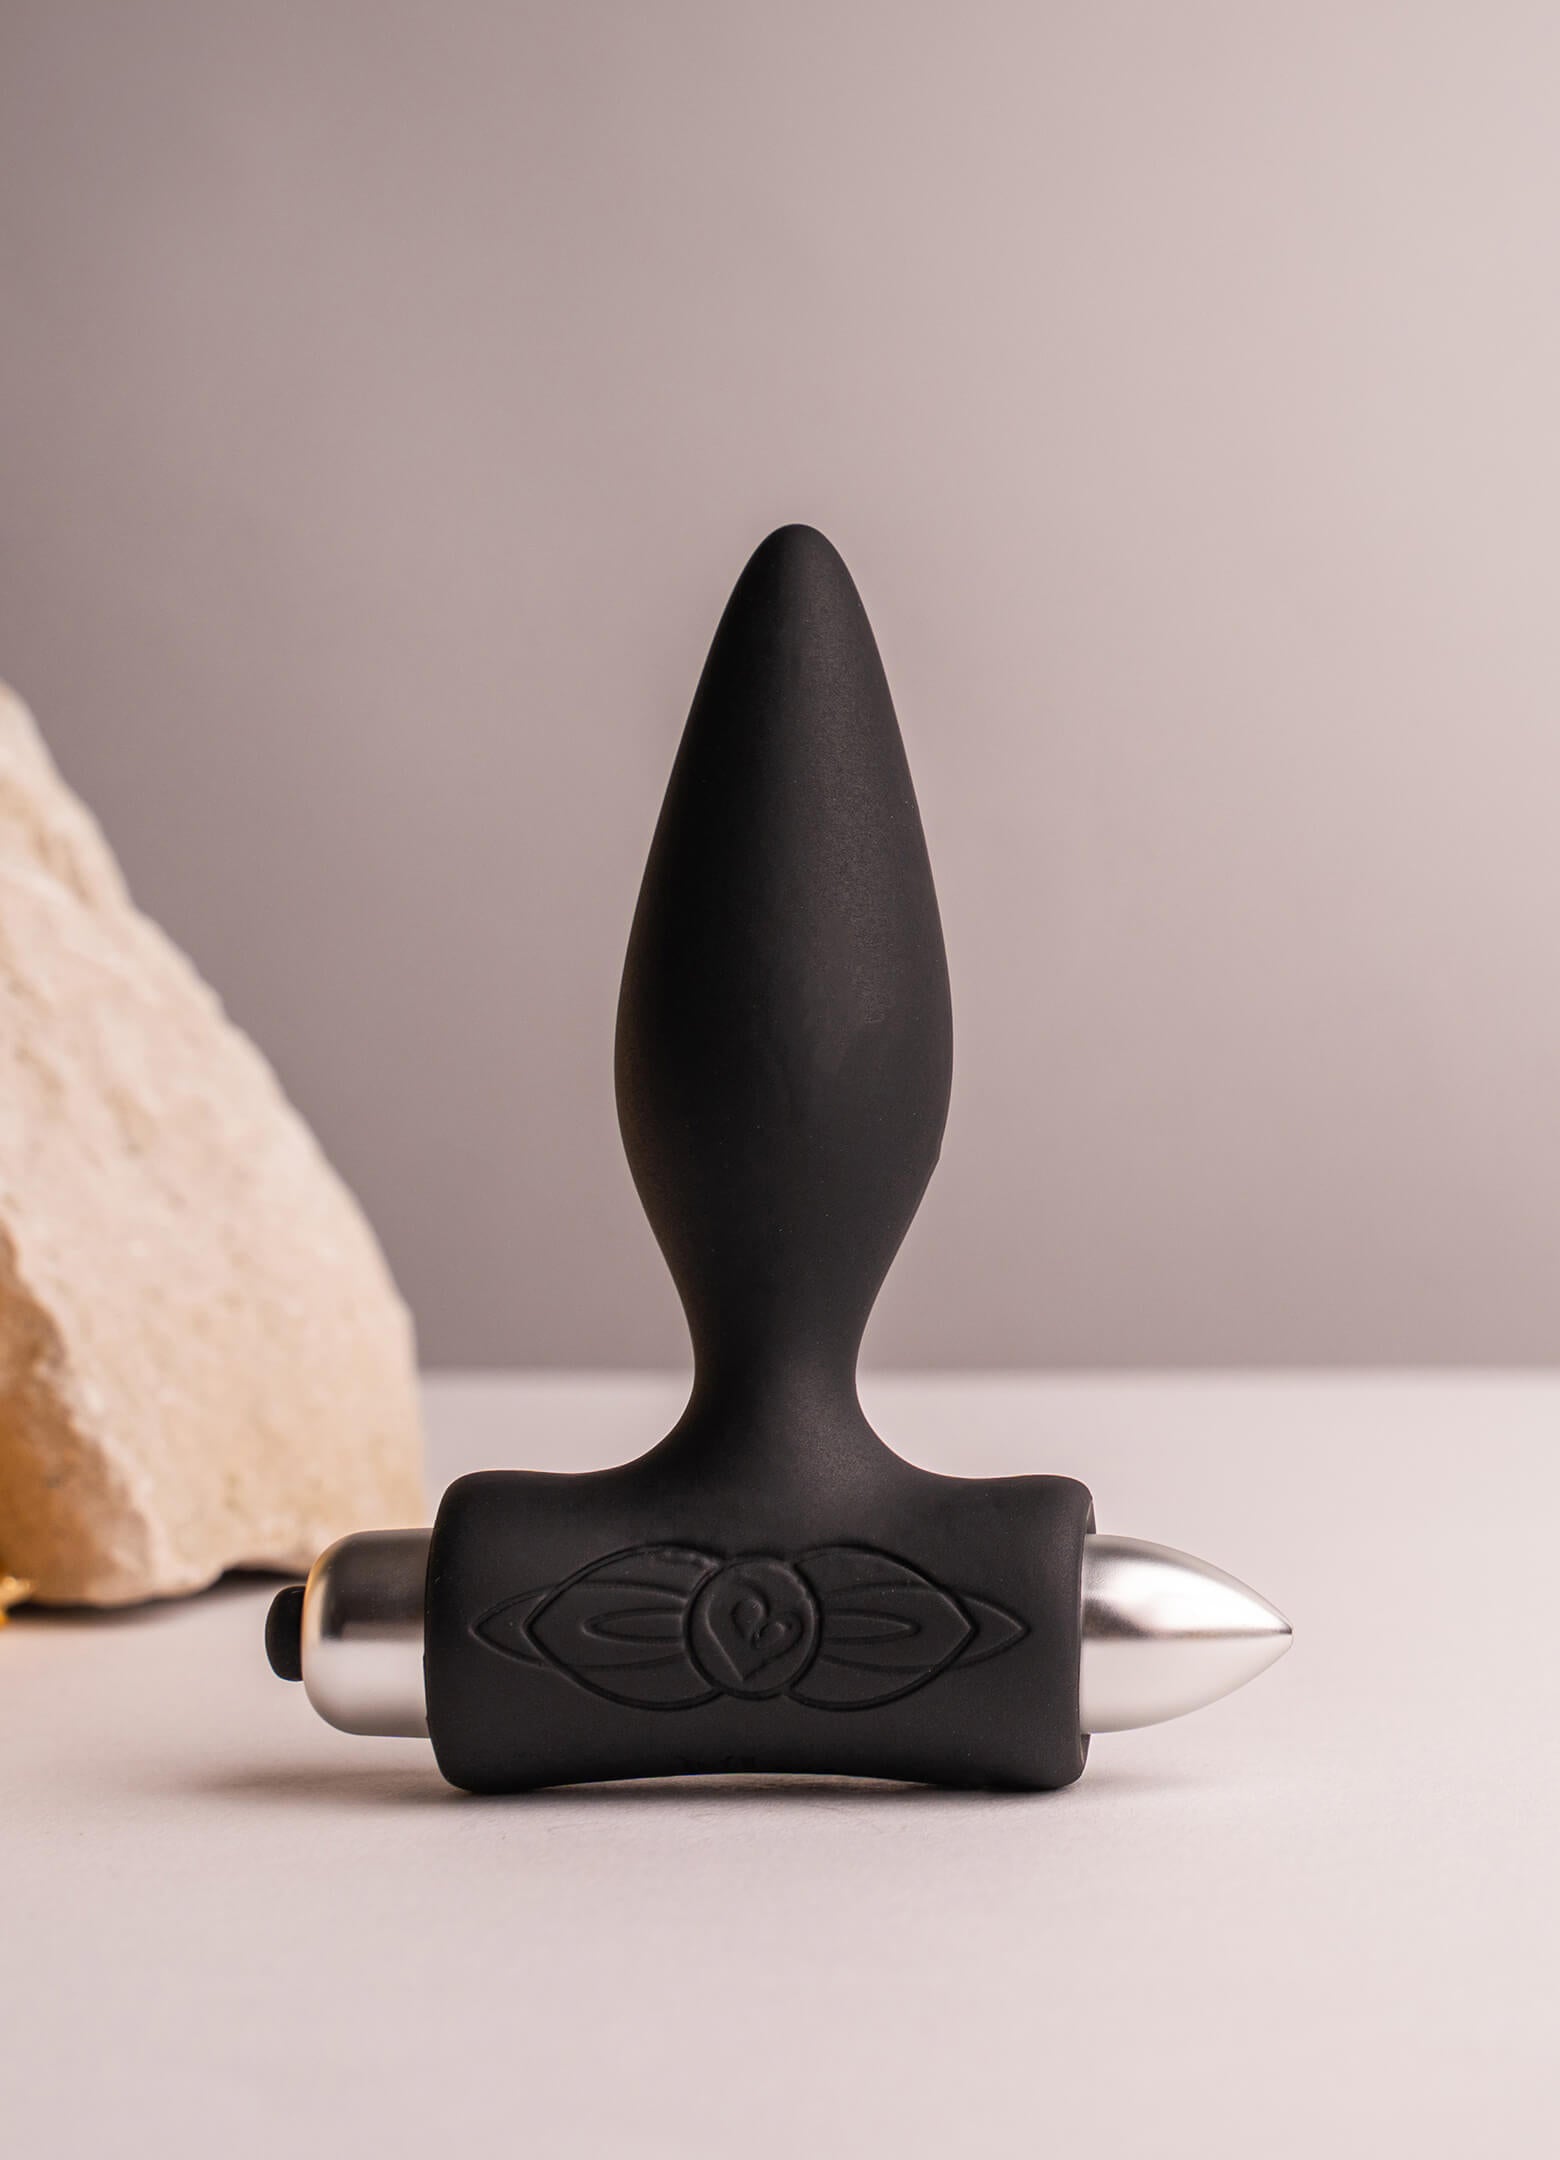 Black silicone tapered tip butt plug housing a removable bullet vibrator.